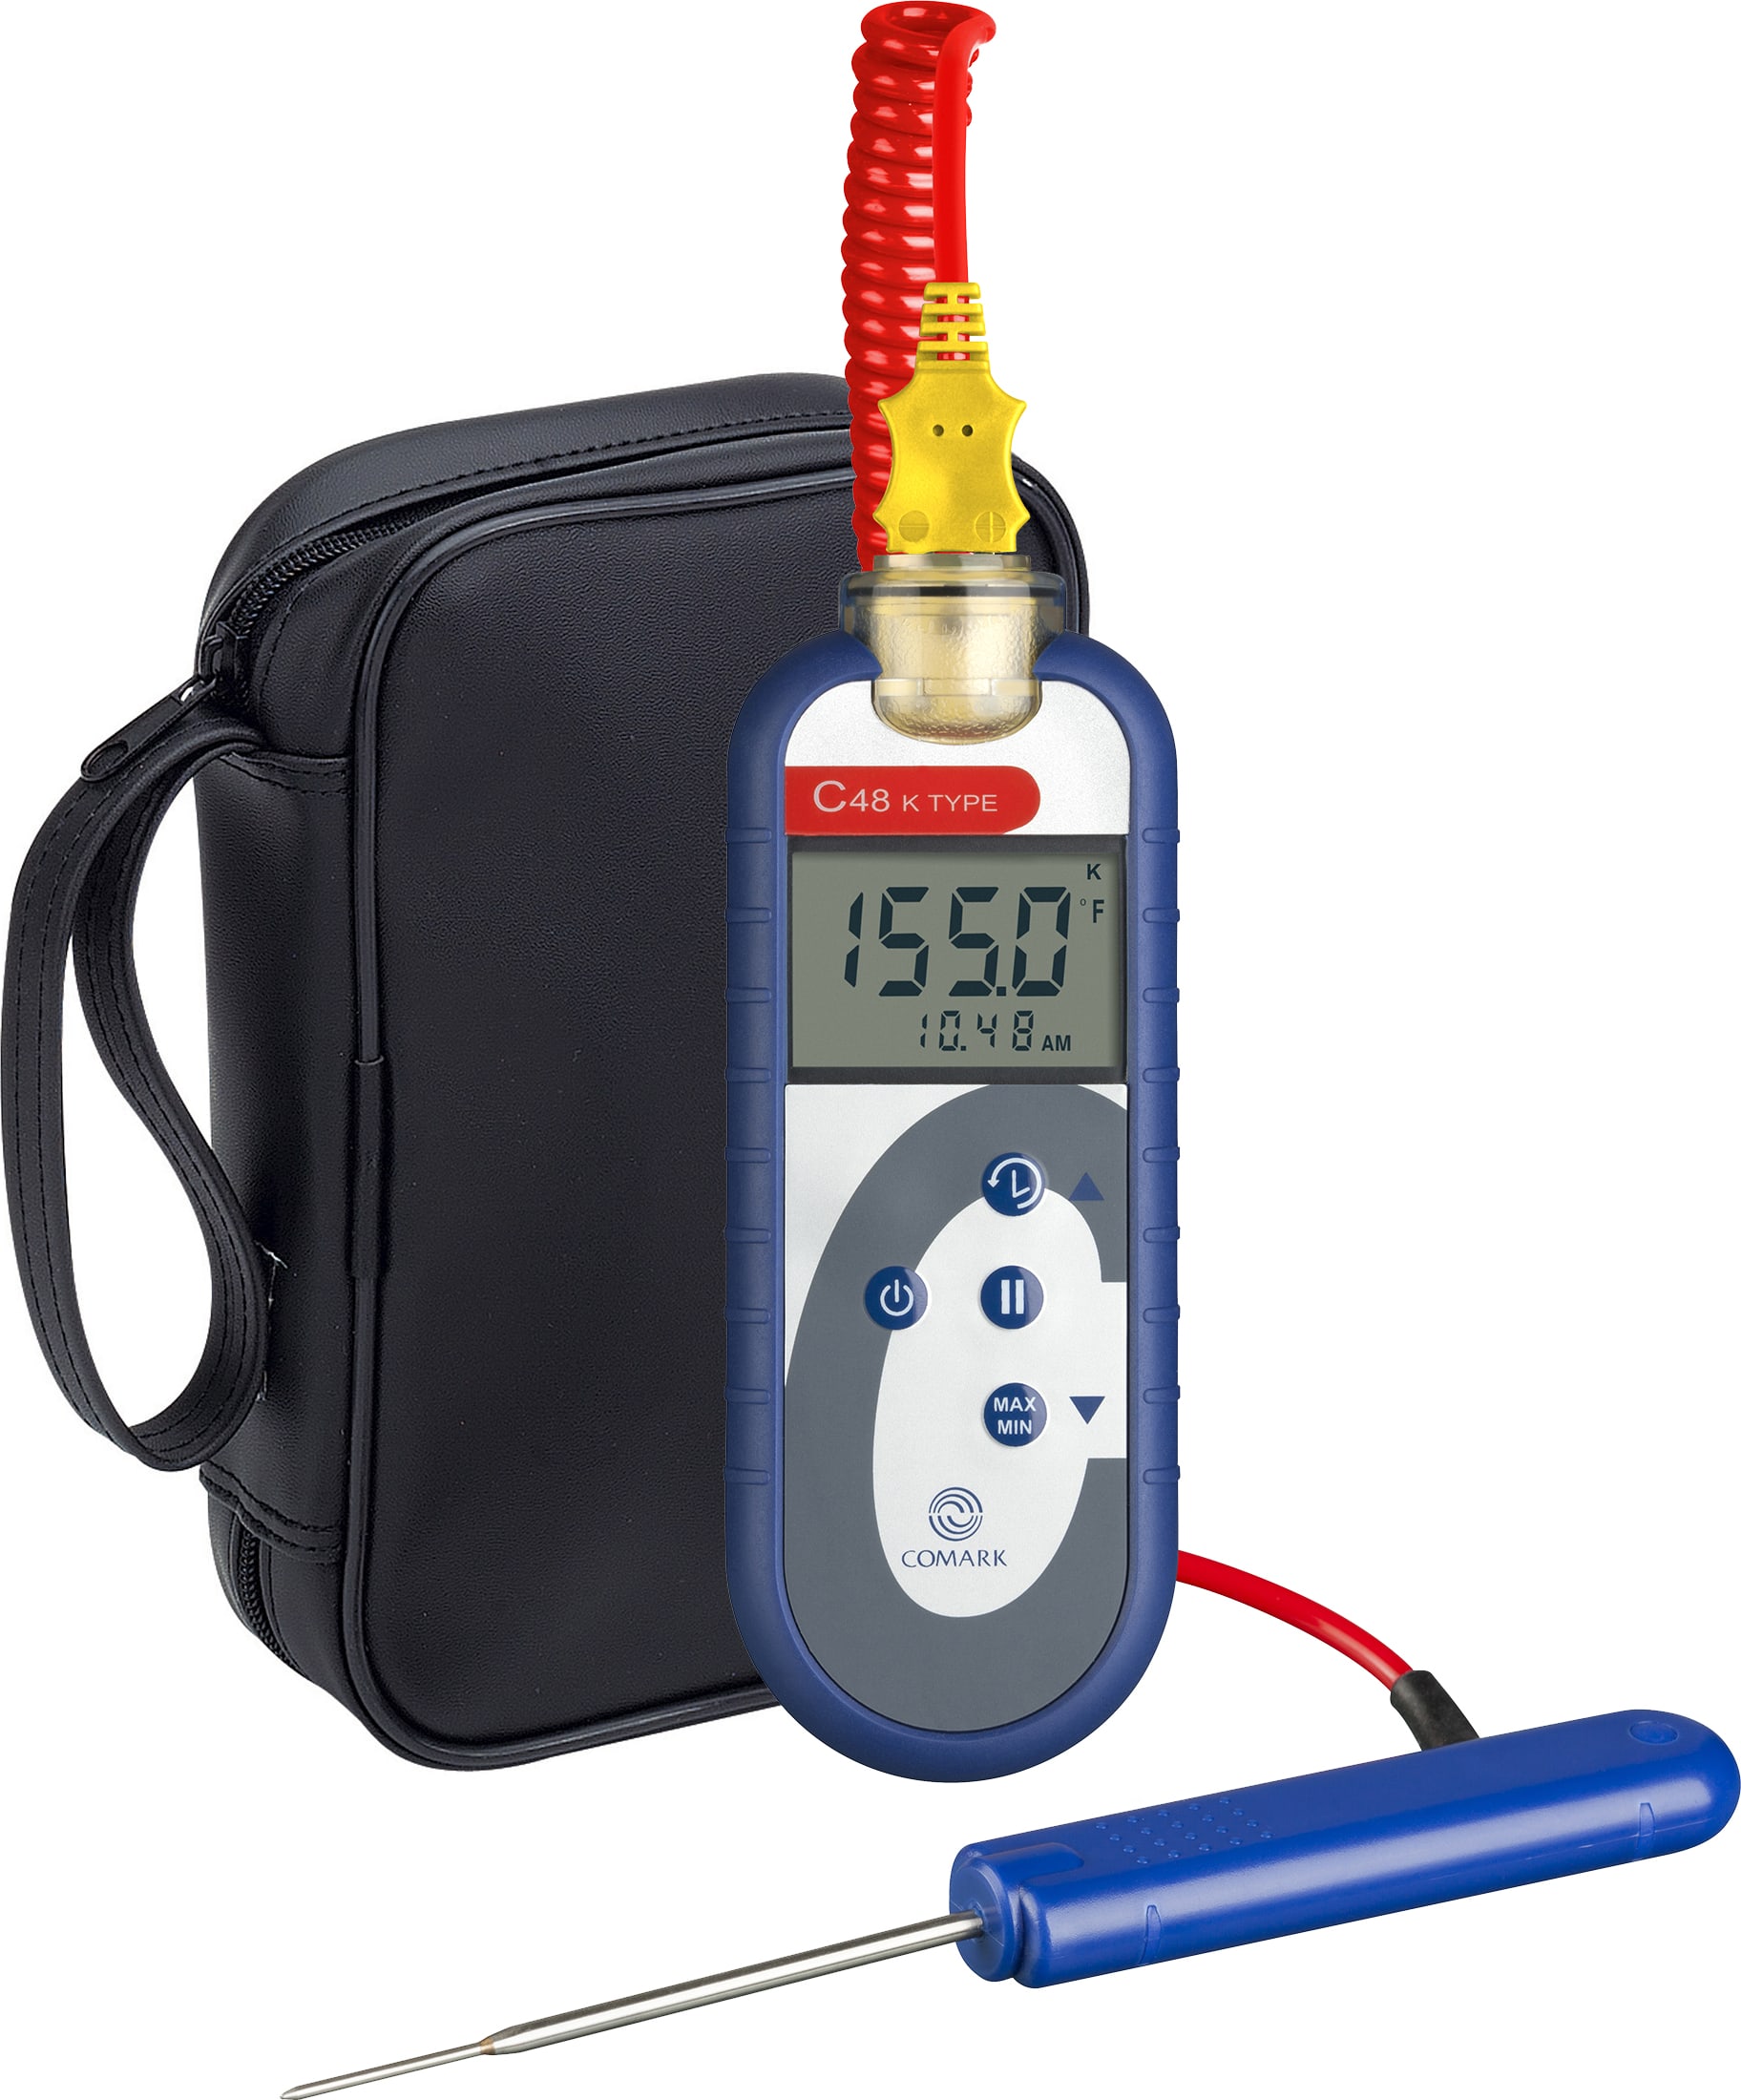 Antimicrobial Waterproof Type K Thermocouple Food Thermometer (Comark C48)